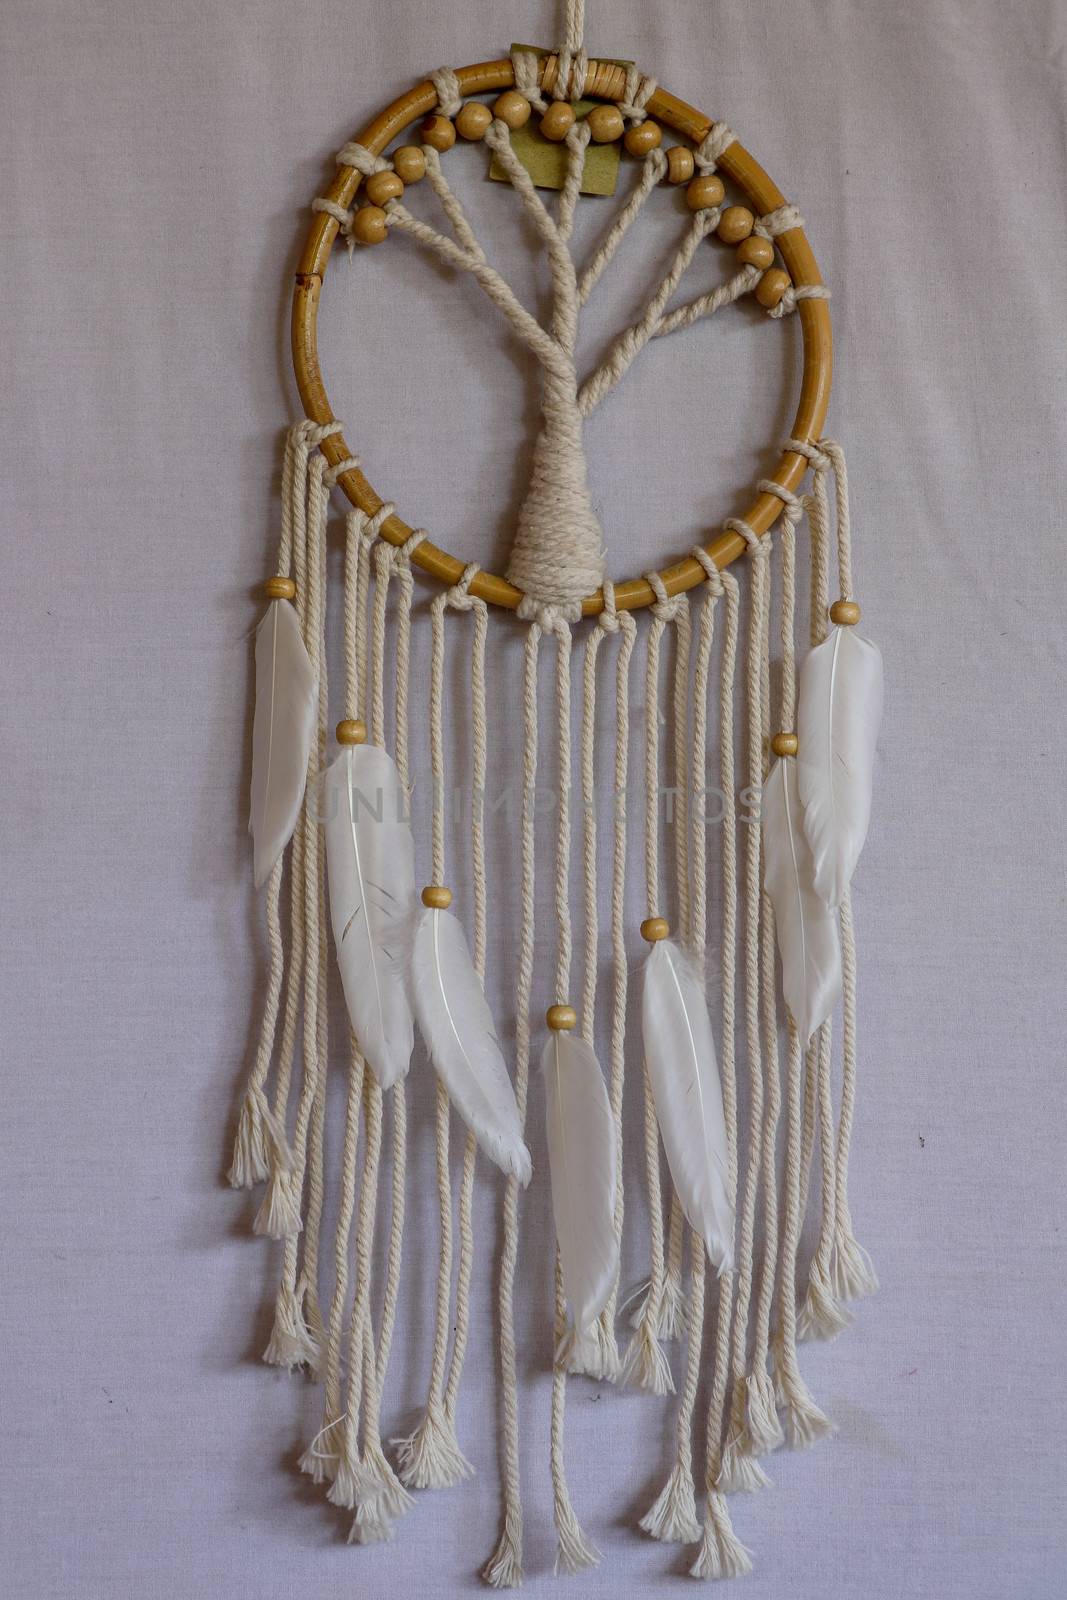 White dreamcatcher - Indian amulet that protects the sleeper from evil spirits and diseases.. The tree - symbol of life. White background.